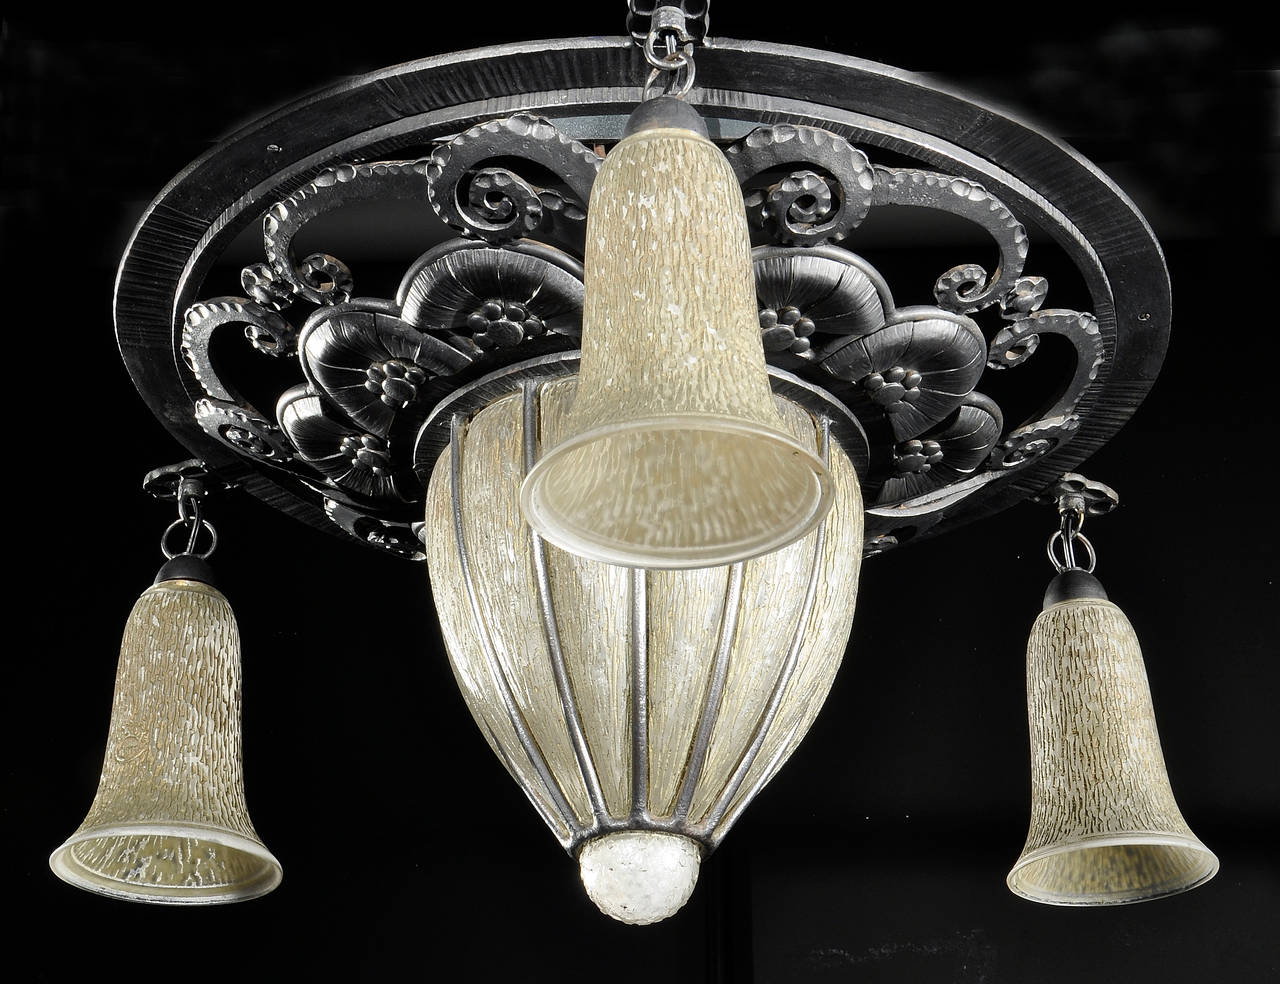 Beautiful Art Deco Delatte chandelier circa 1925 in wrought iron and acid etched glass. The wrought iron is not signed so the maker is unknown but the quality is really exceptional and higher compare to usual wrought iron mounts ….... Edgar Brandt ,